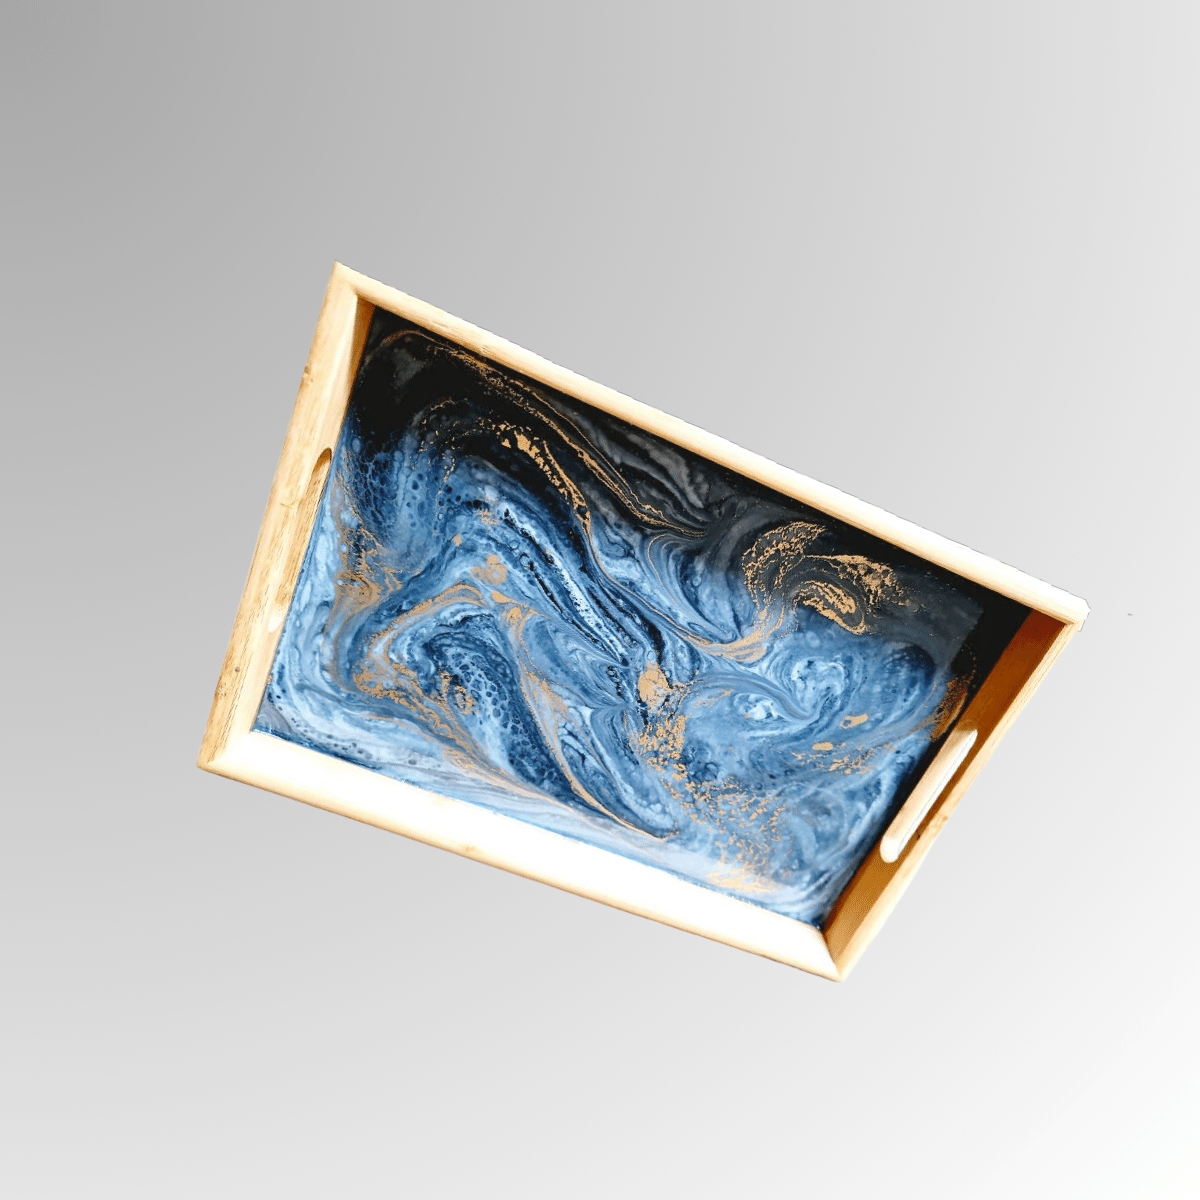 Decorative Wooden Tray With Resin Art